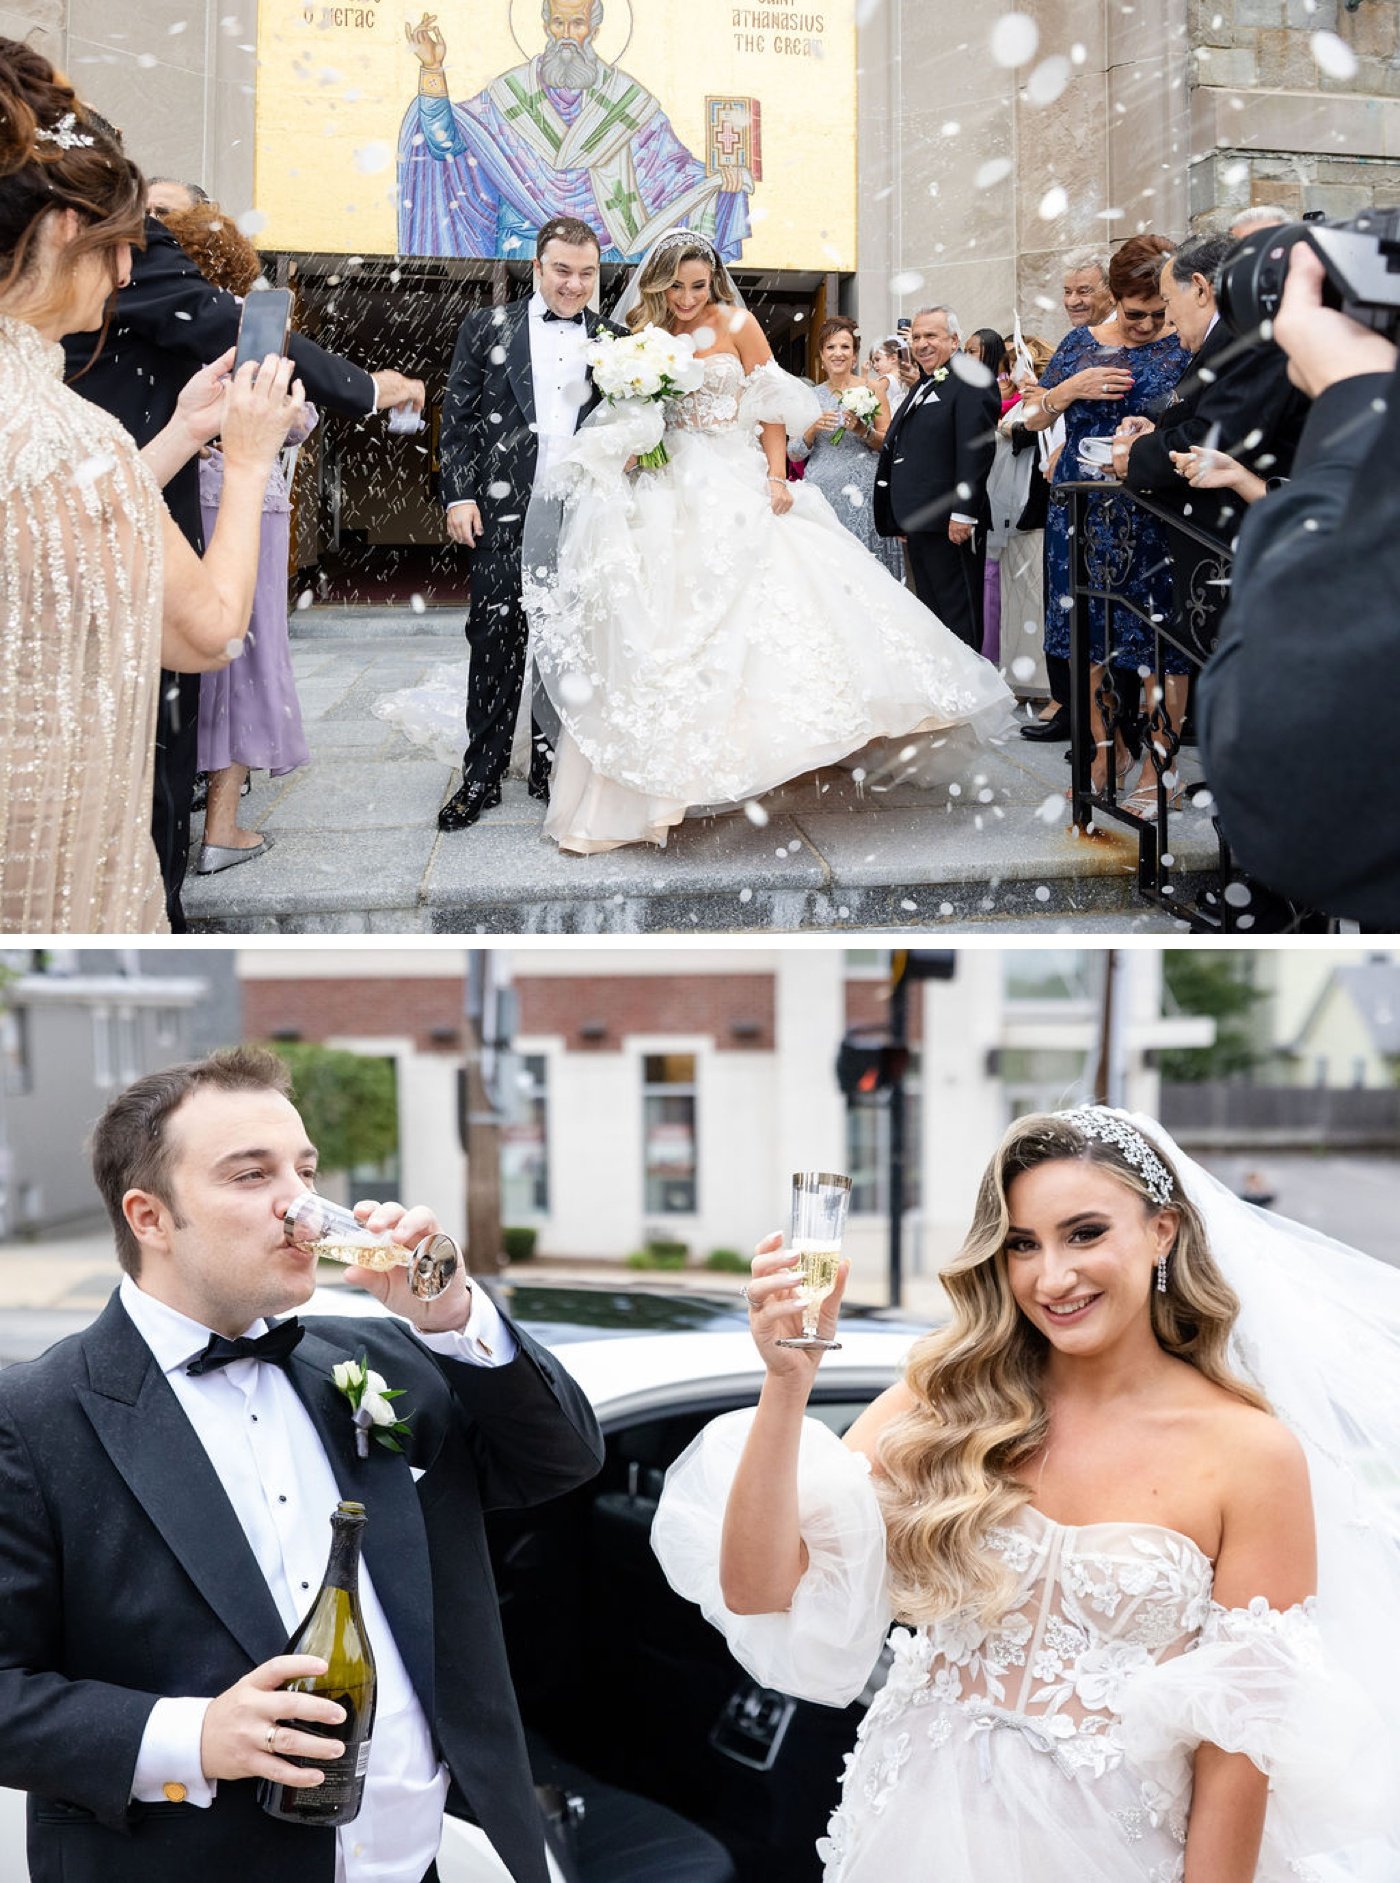 Wedding guests throwing rice on the bride and groom exiting their Greek Orthodox church ceremony